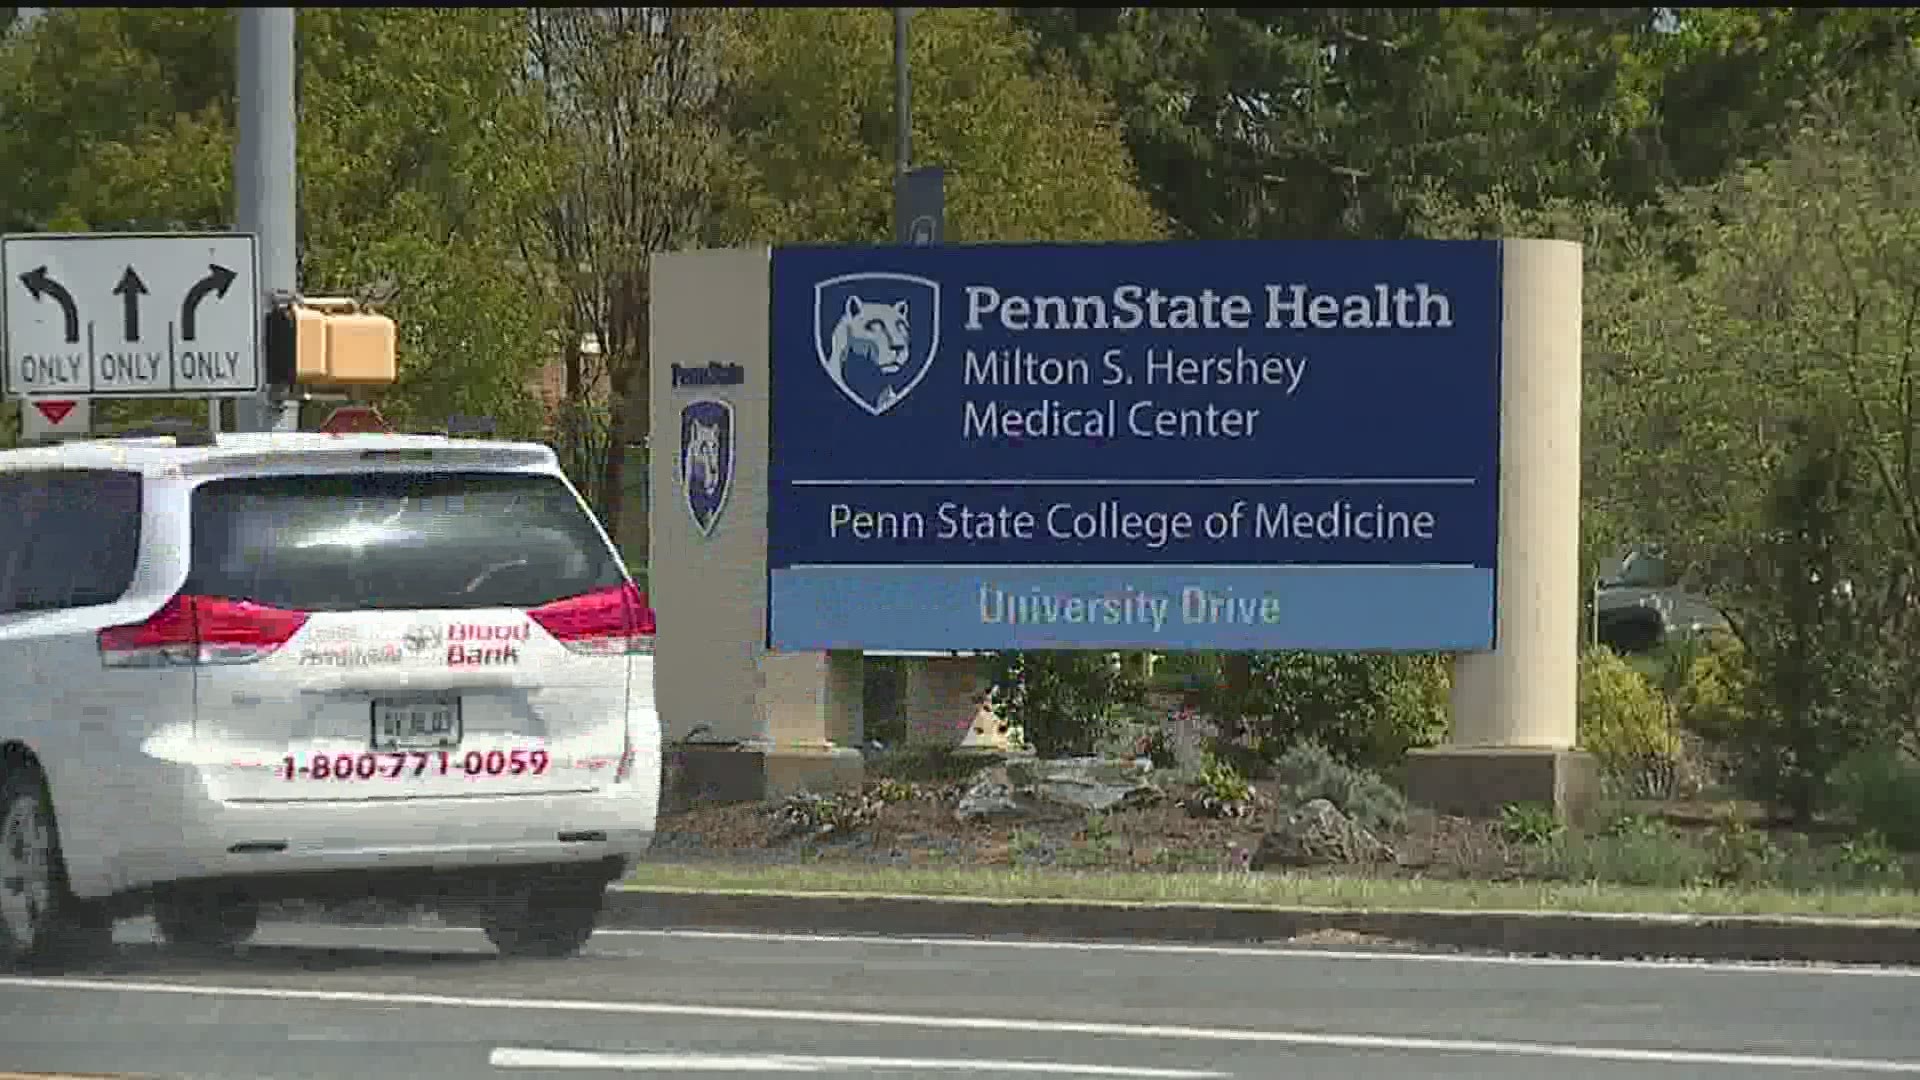 Penn State Health officials are concerned people who need immediate medical care may not visit the ER because of fears of contracting COVID-19.